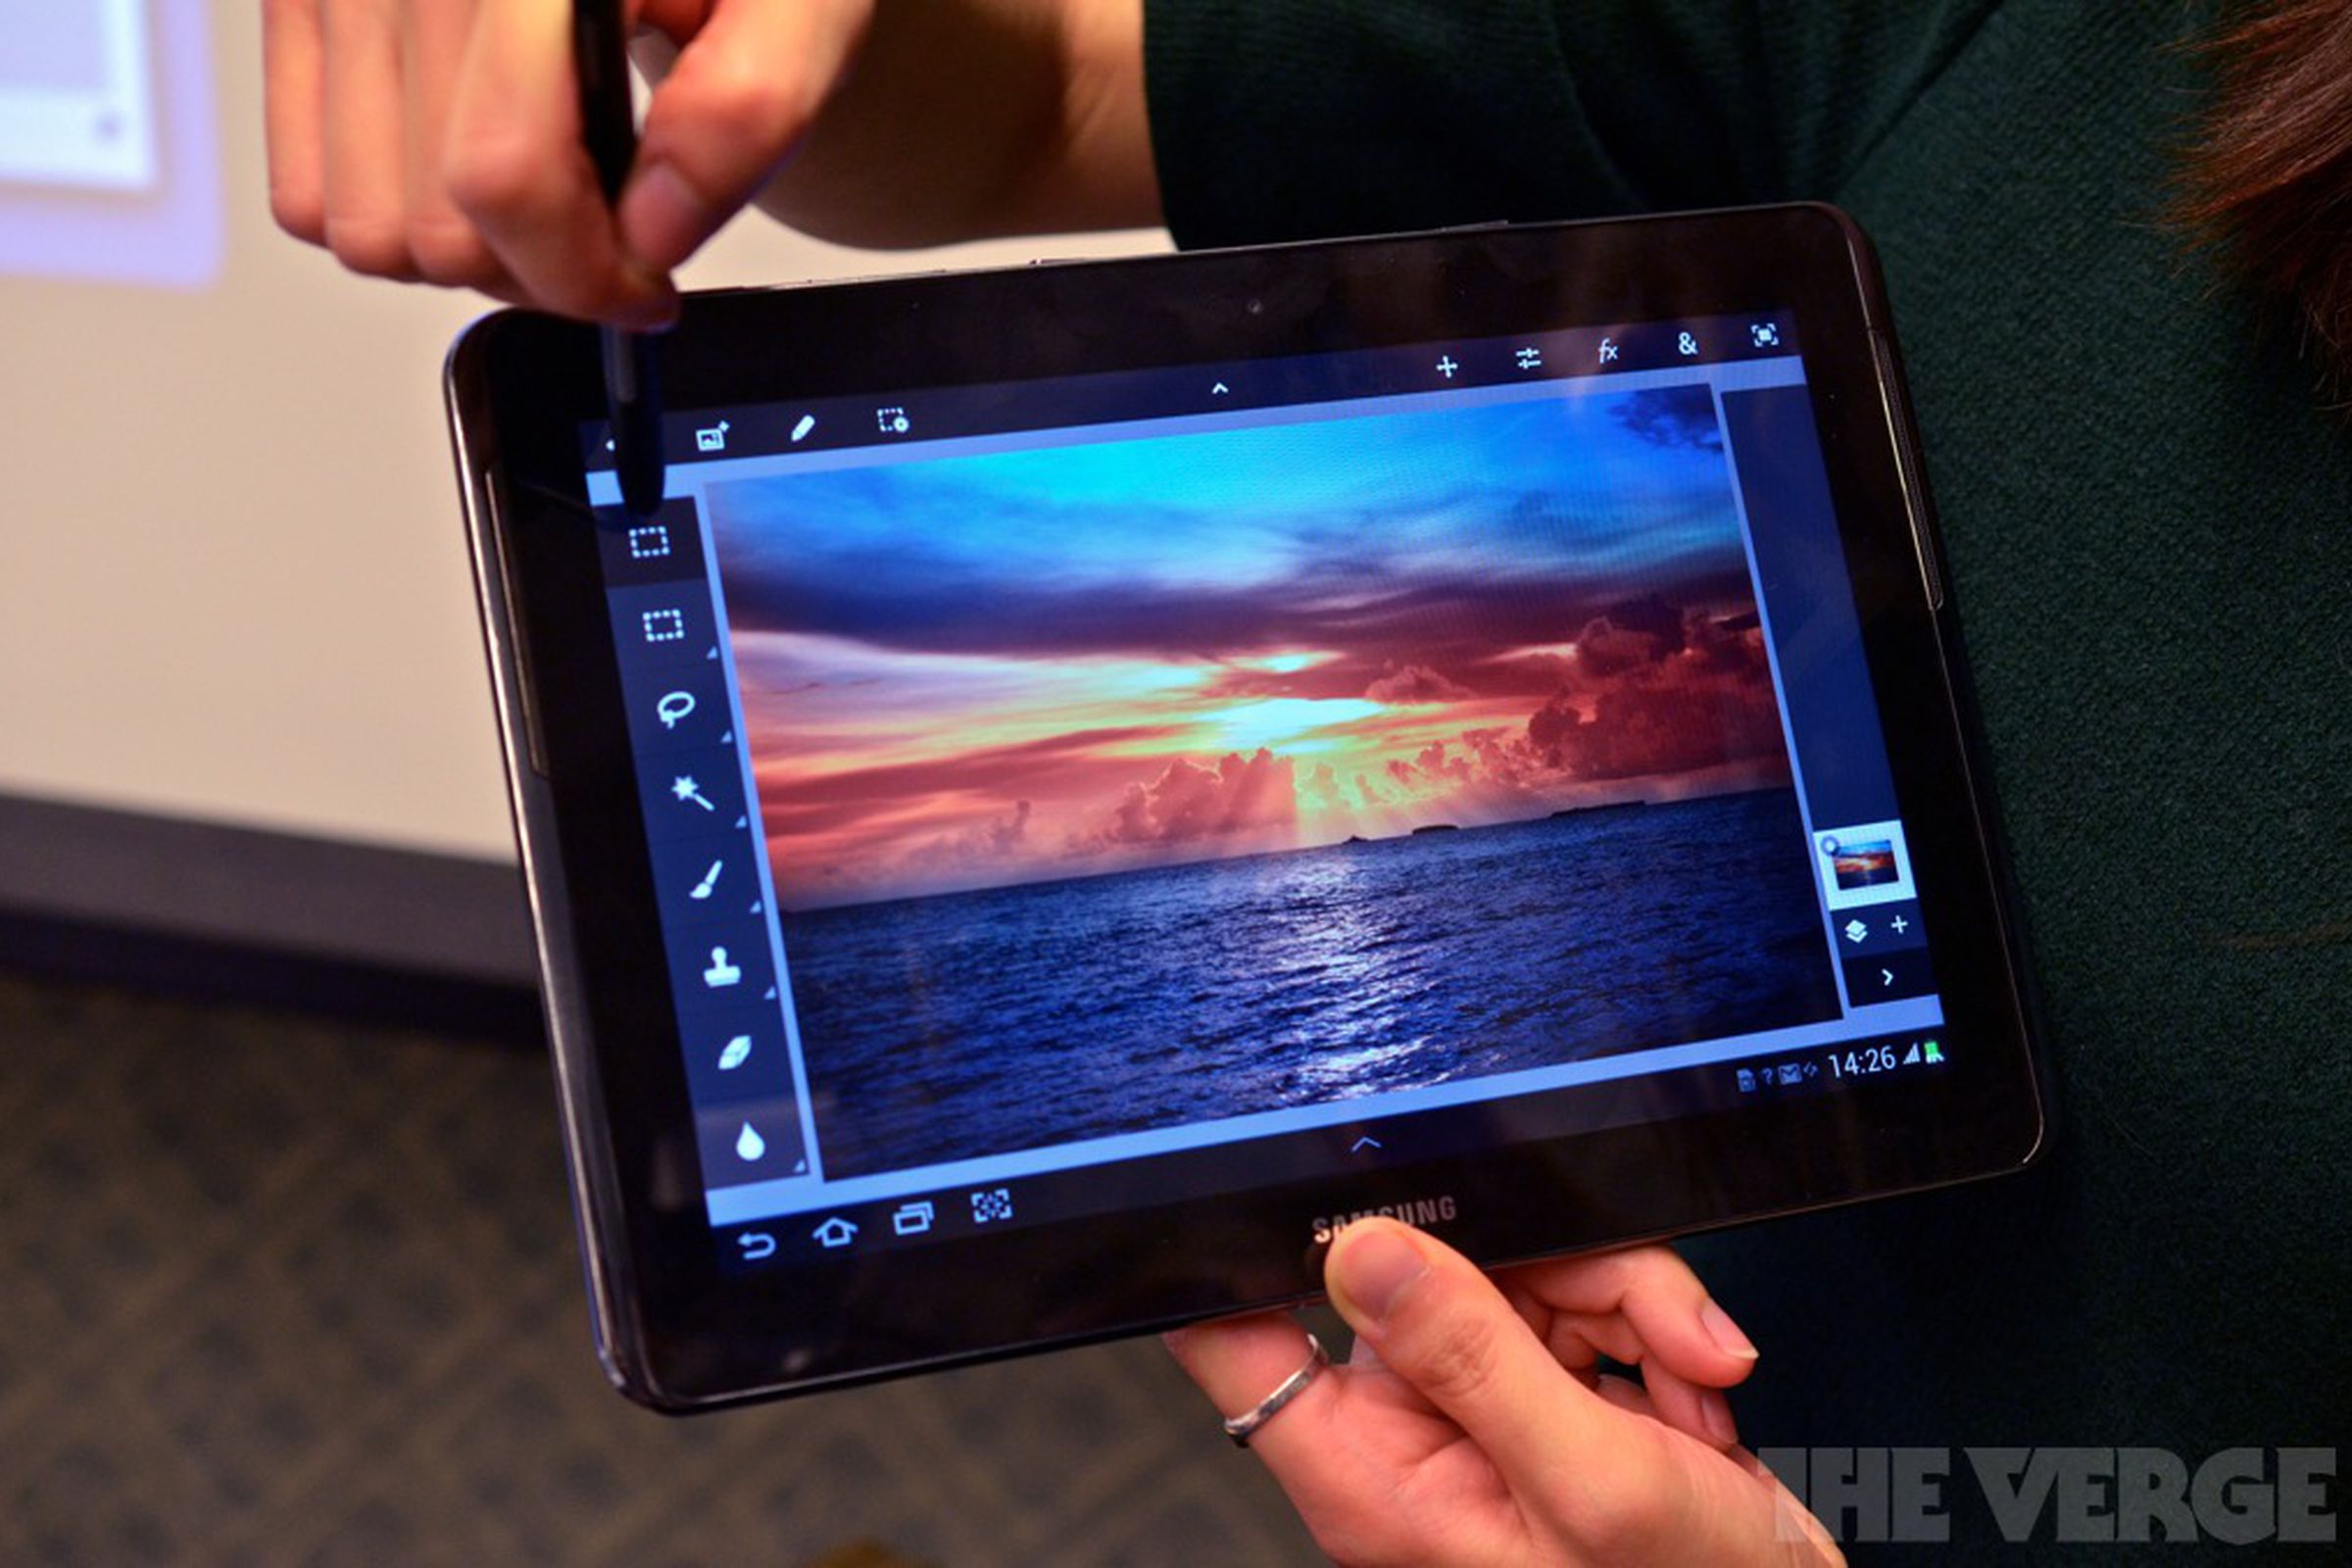 Gallery Photo: Samsung Galaxy Note 10.1 hands-on